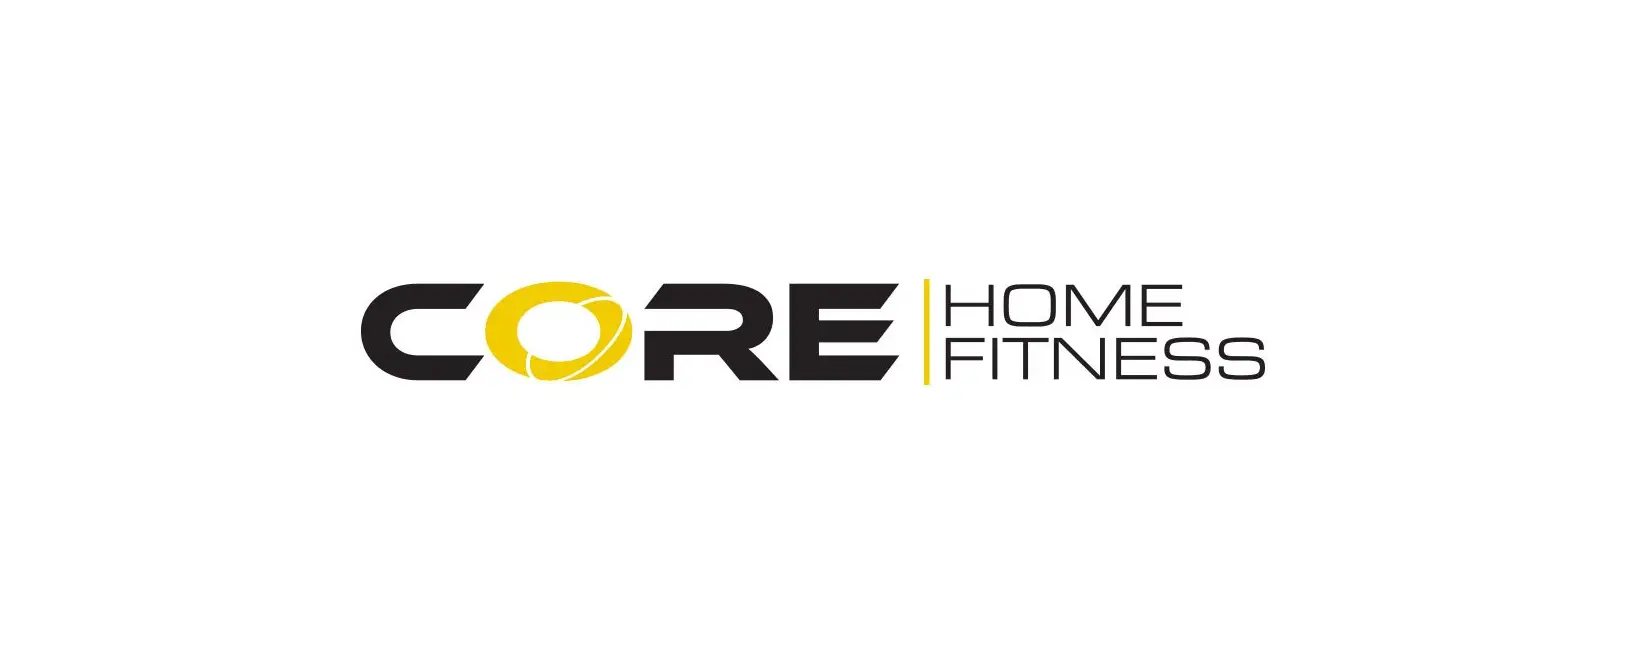 Core Home Fitness Discount Code 2022